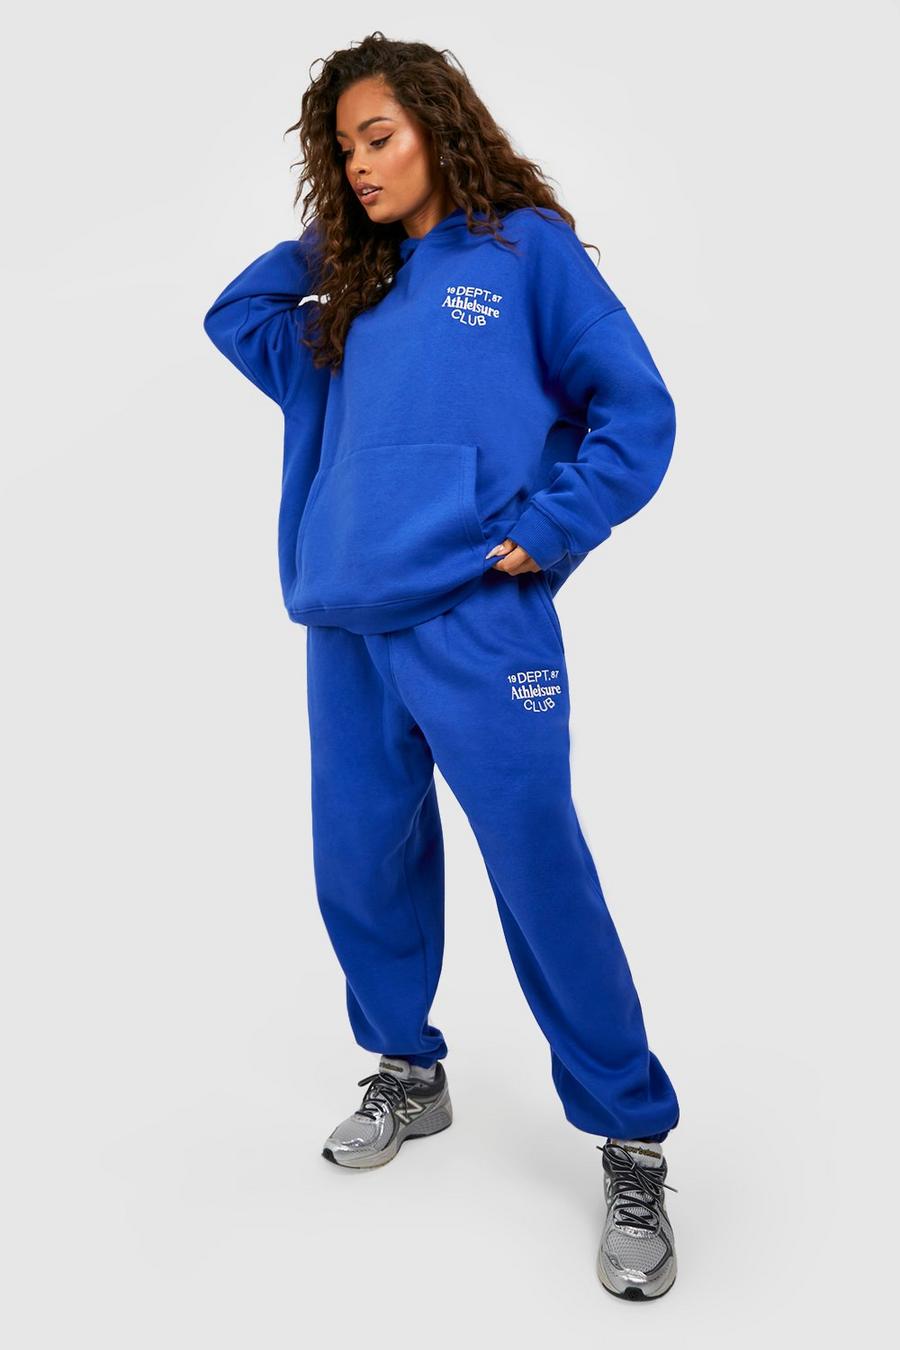 Cobalt Athleisure Club Embroidered Hooded Tracksuit